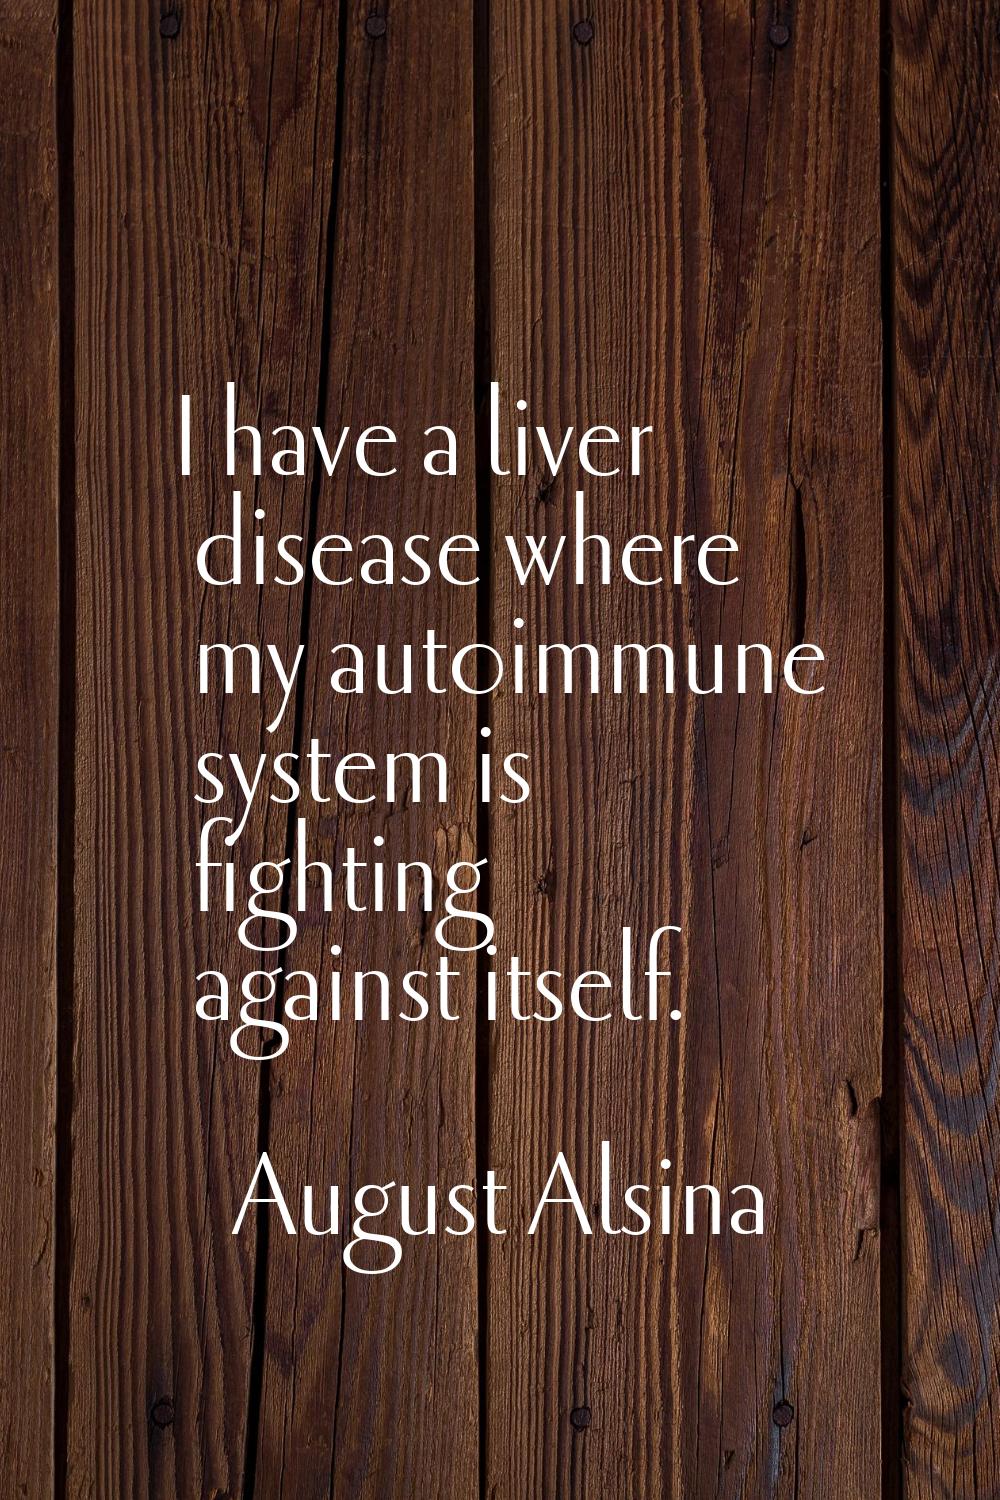 I have a liver disease where my autoimmune system is fighting against itself.